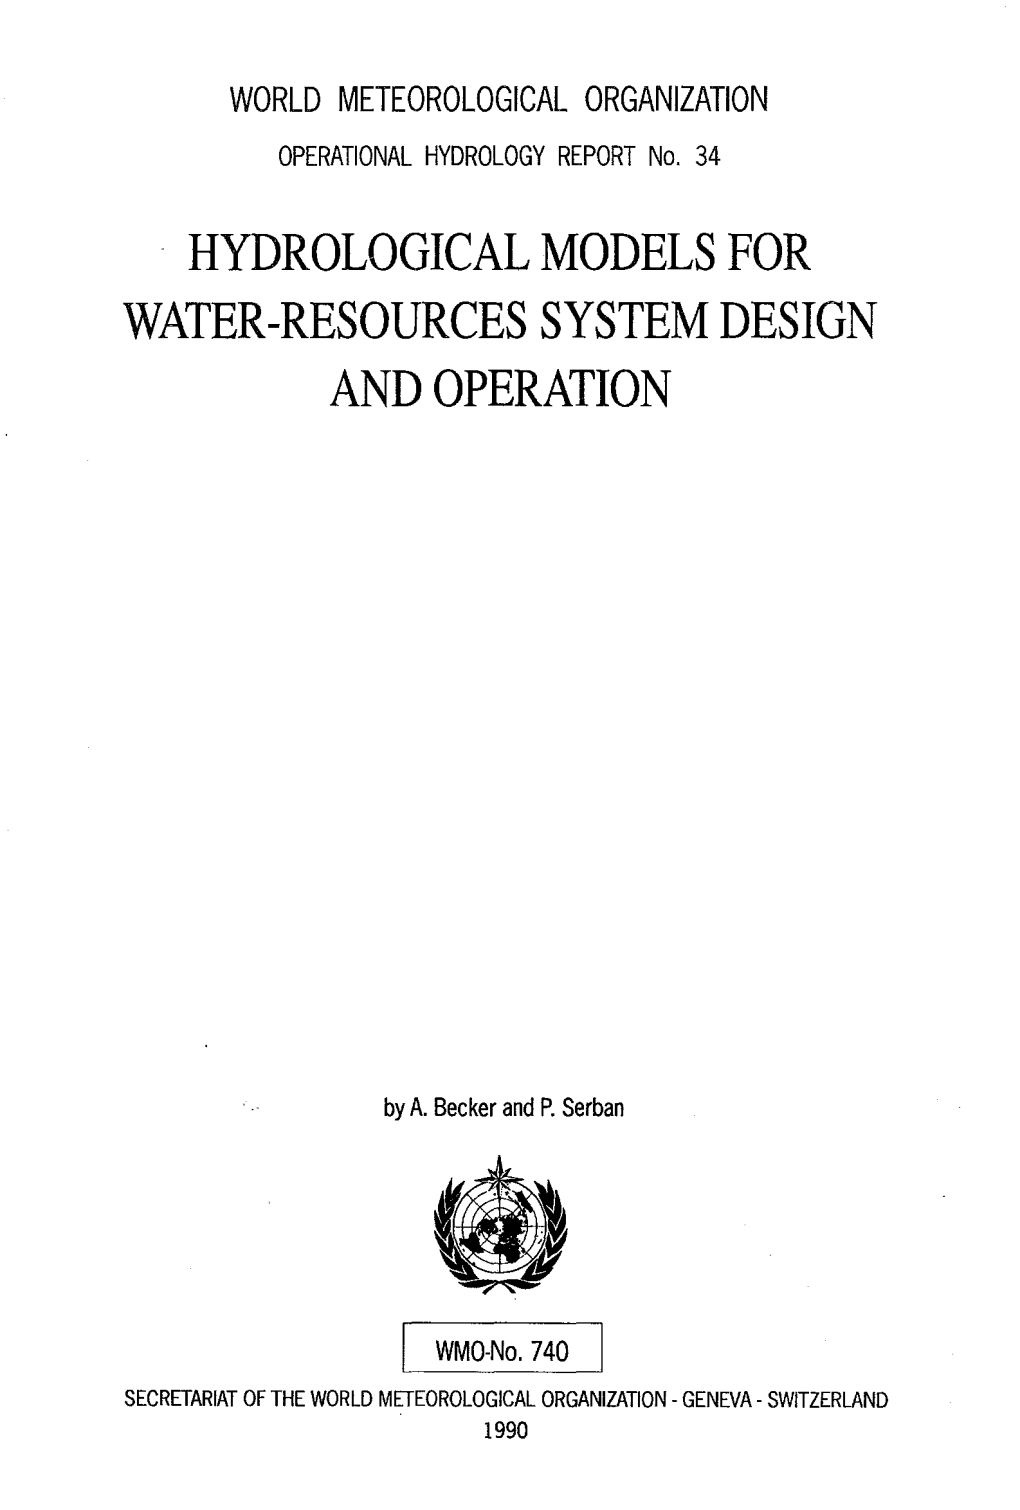 Hydrological Models for Water-Resources System Design and Operation